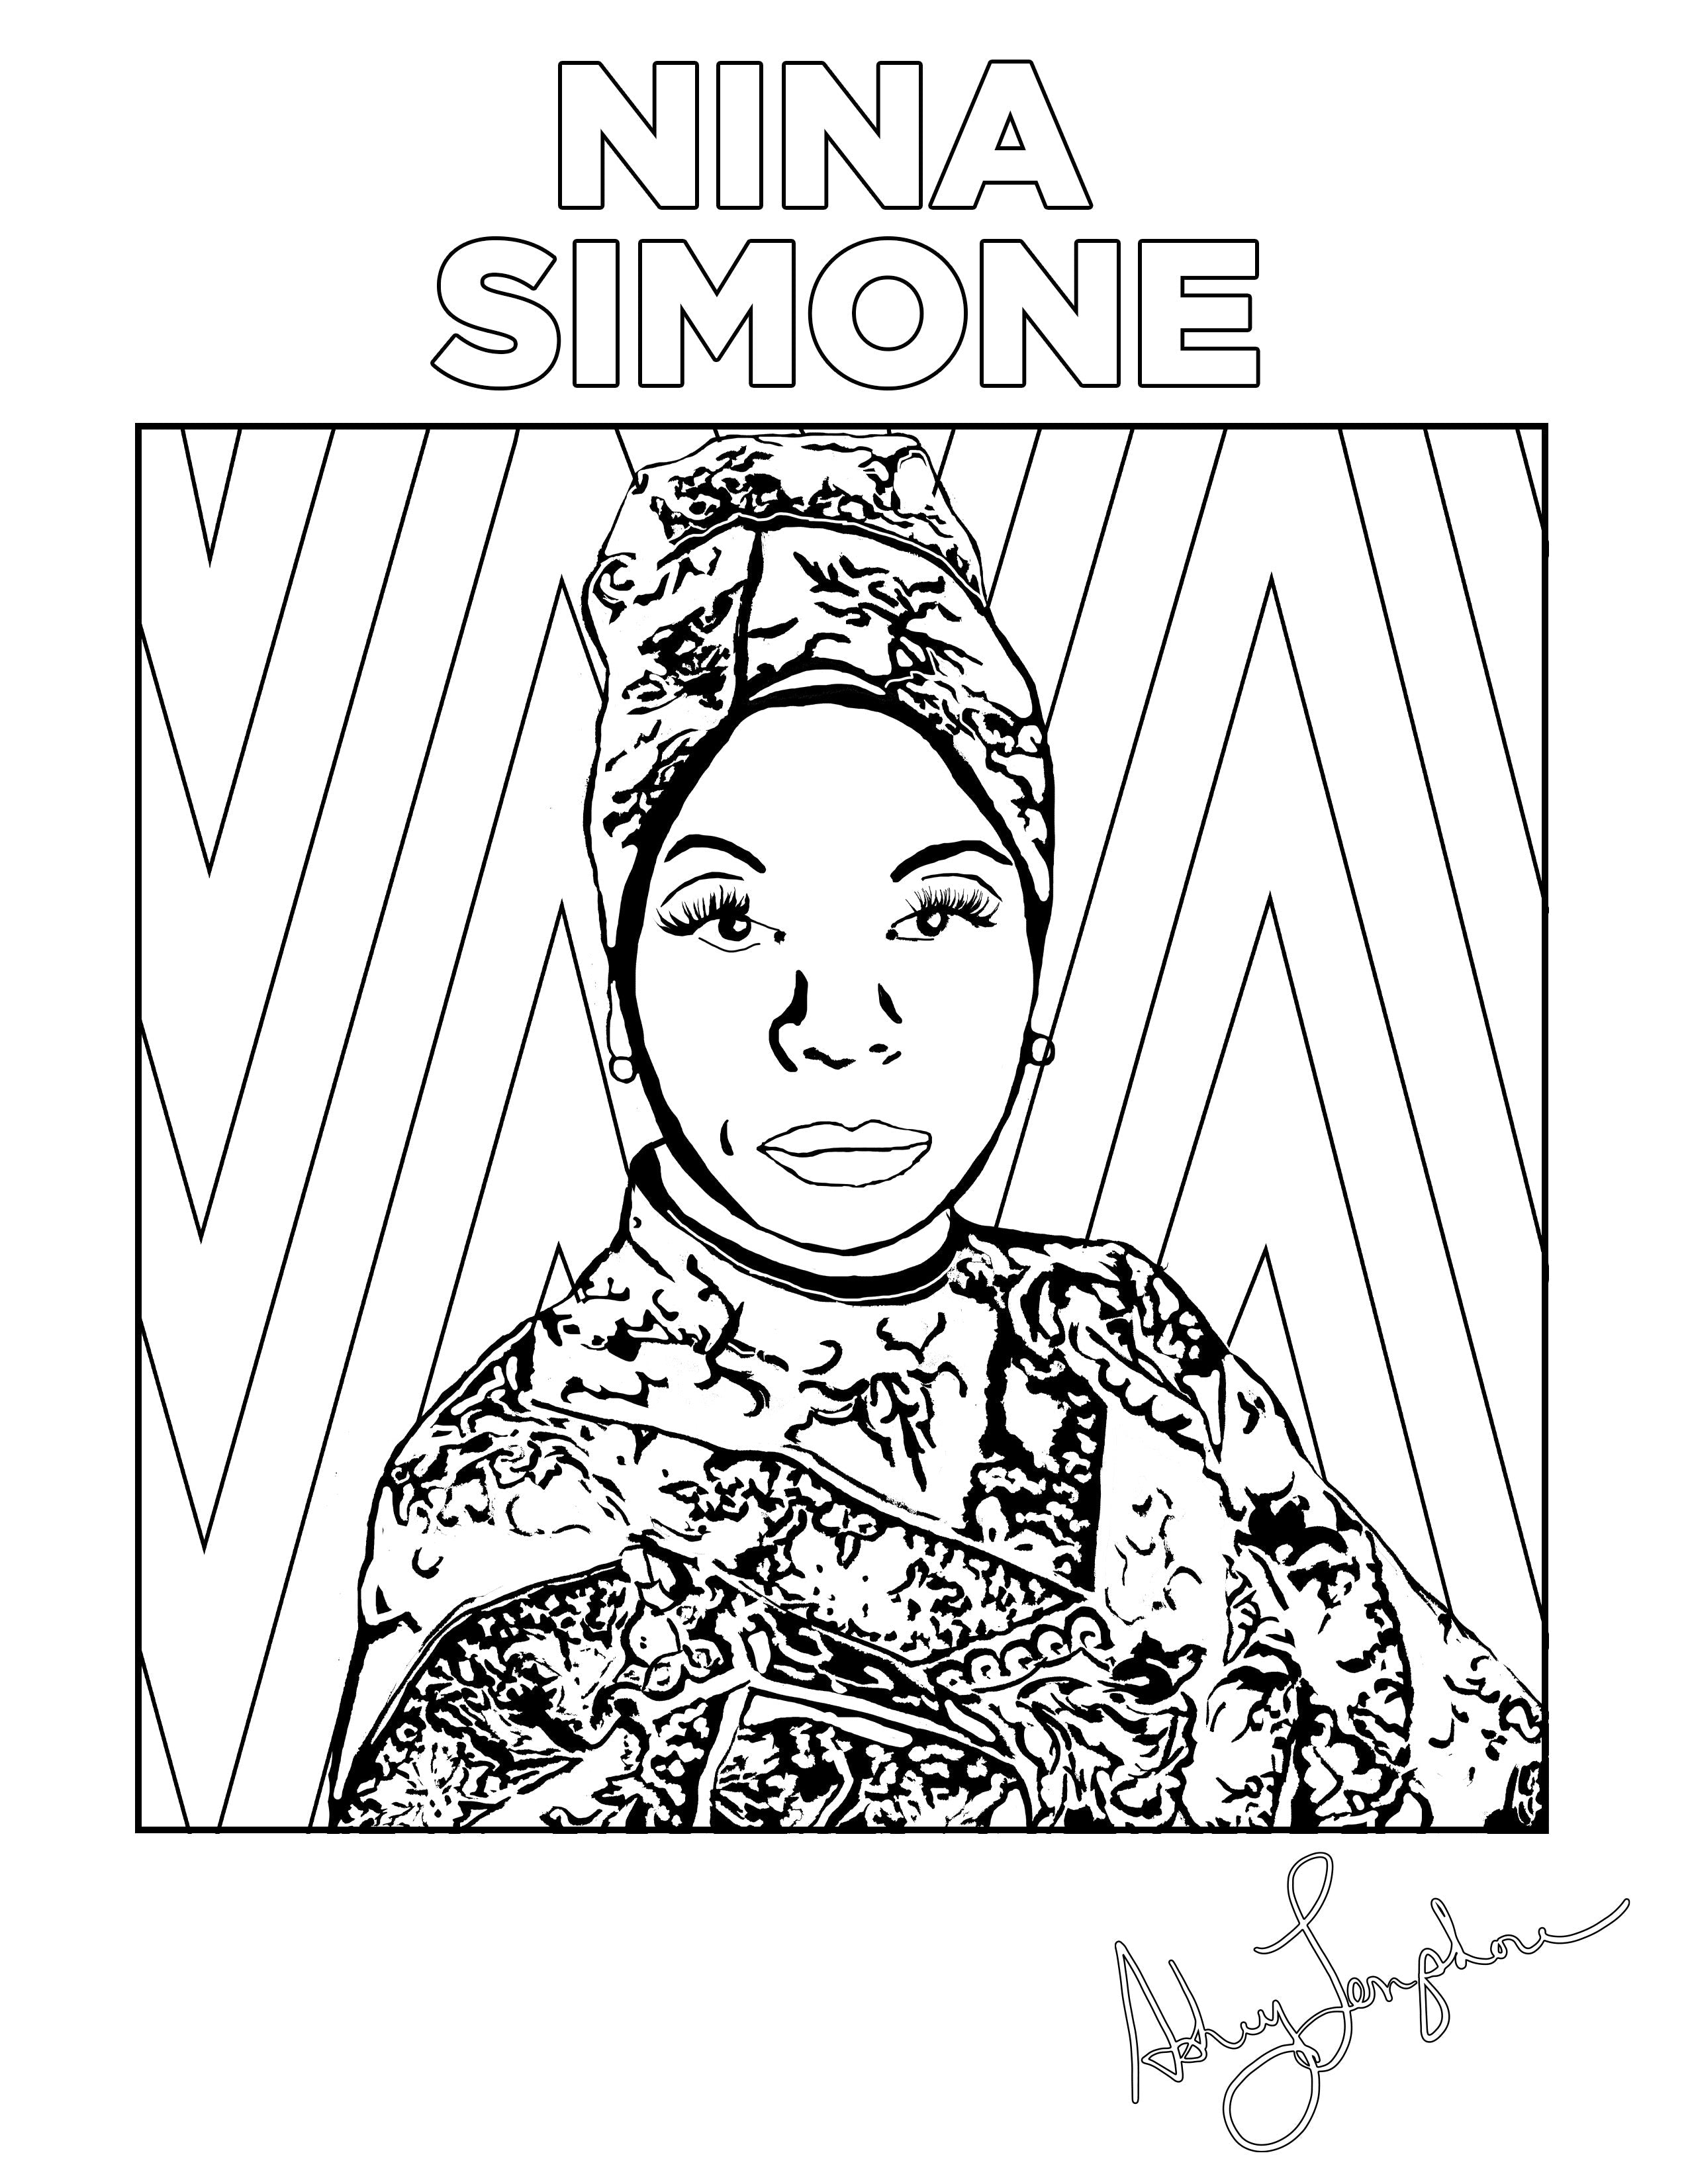 Ashley Longshore coloring pages featuring Nina Simone.